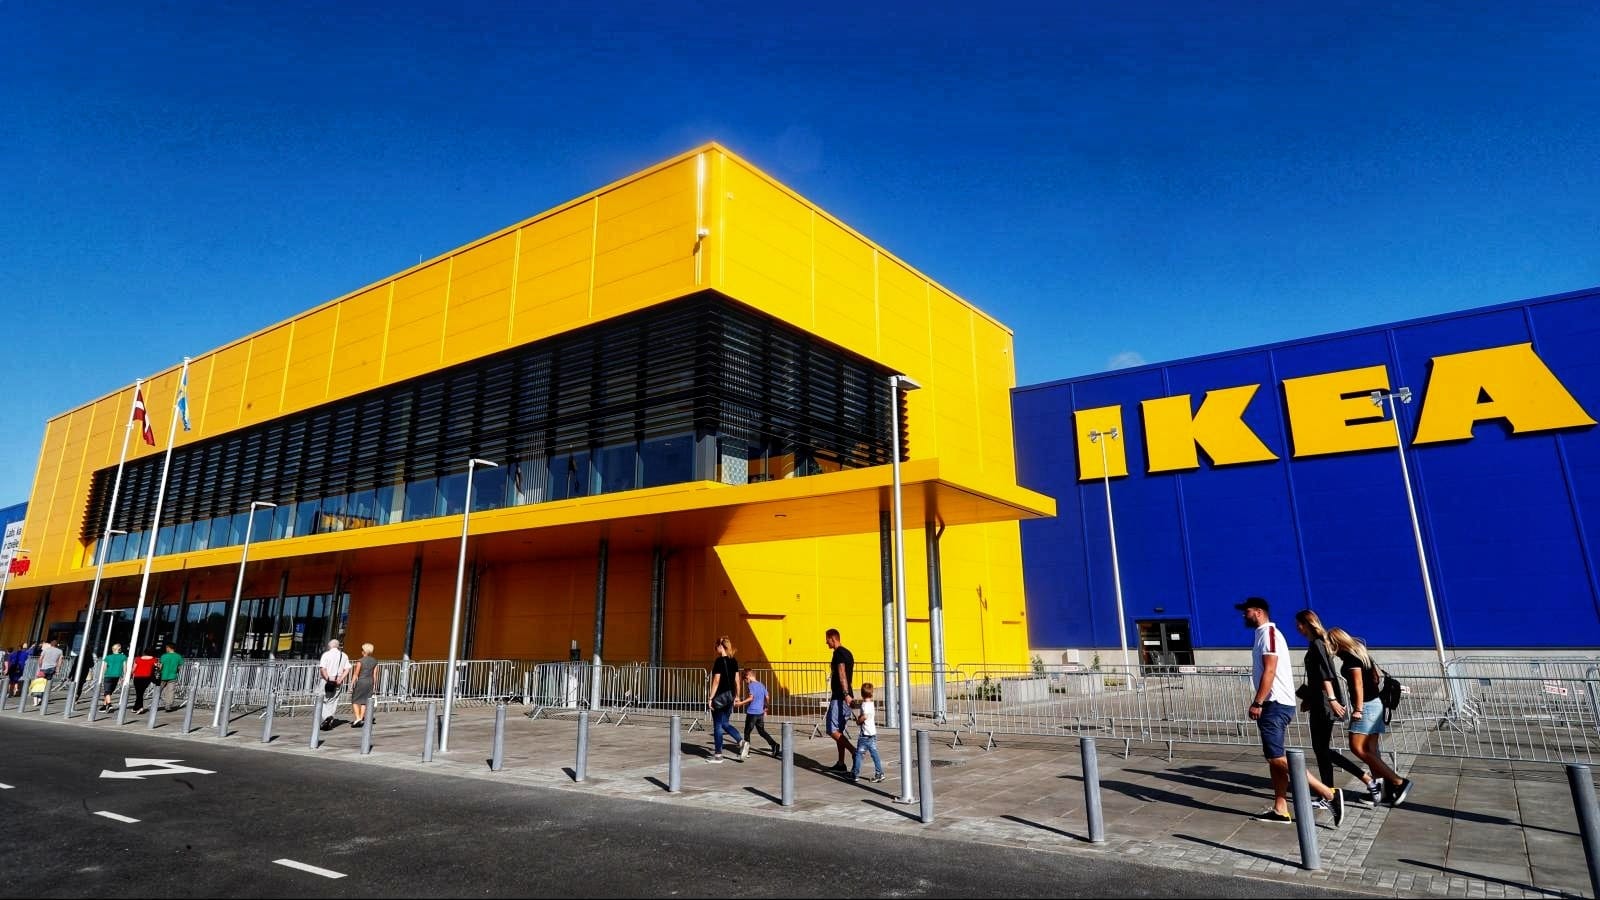 The Biggest IKEA in The World - Rhythm of Home